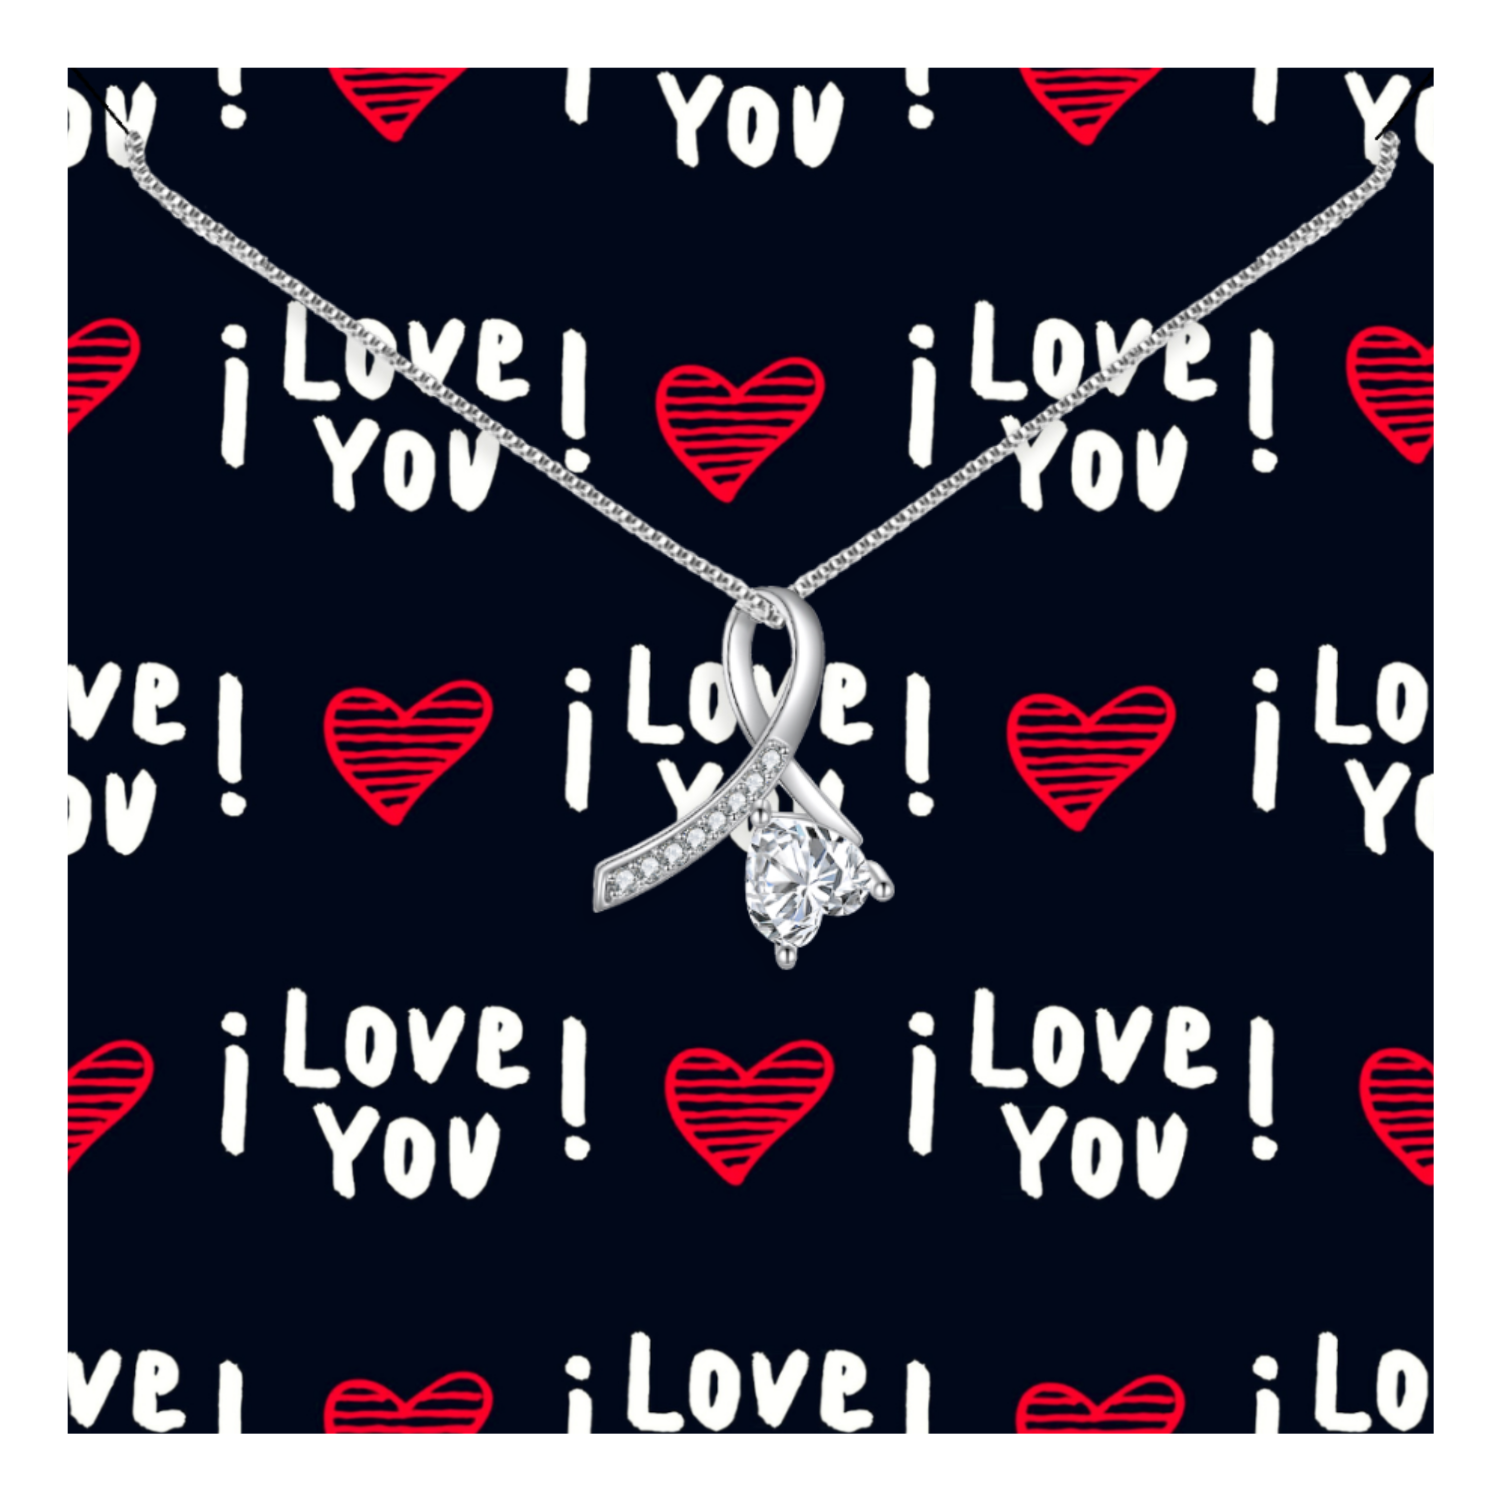 Personalized Necklaces - I Love You Necklace 